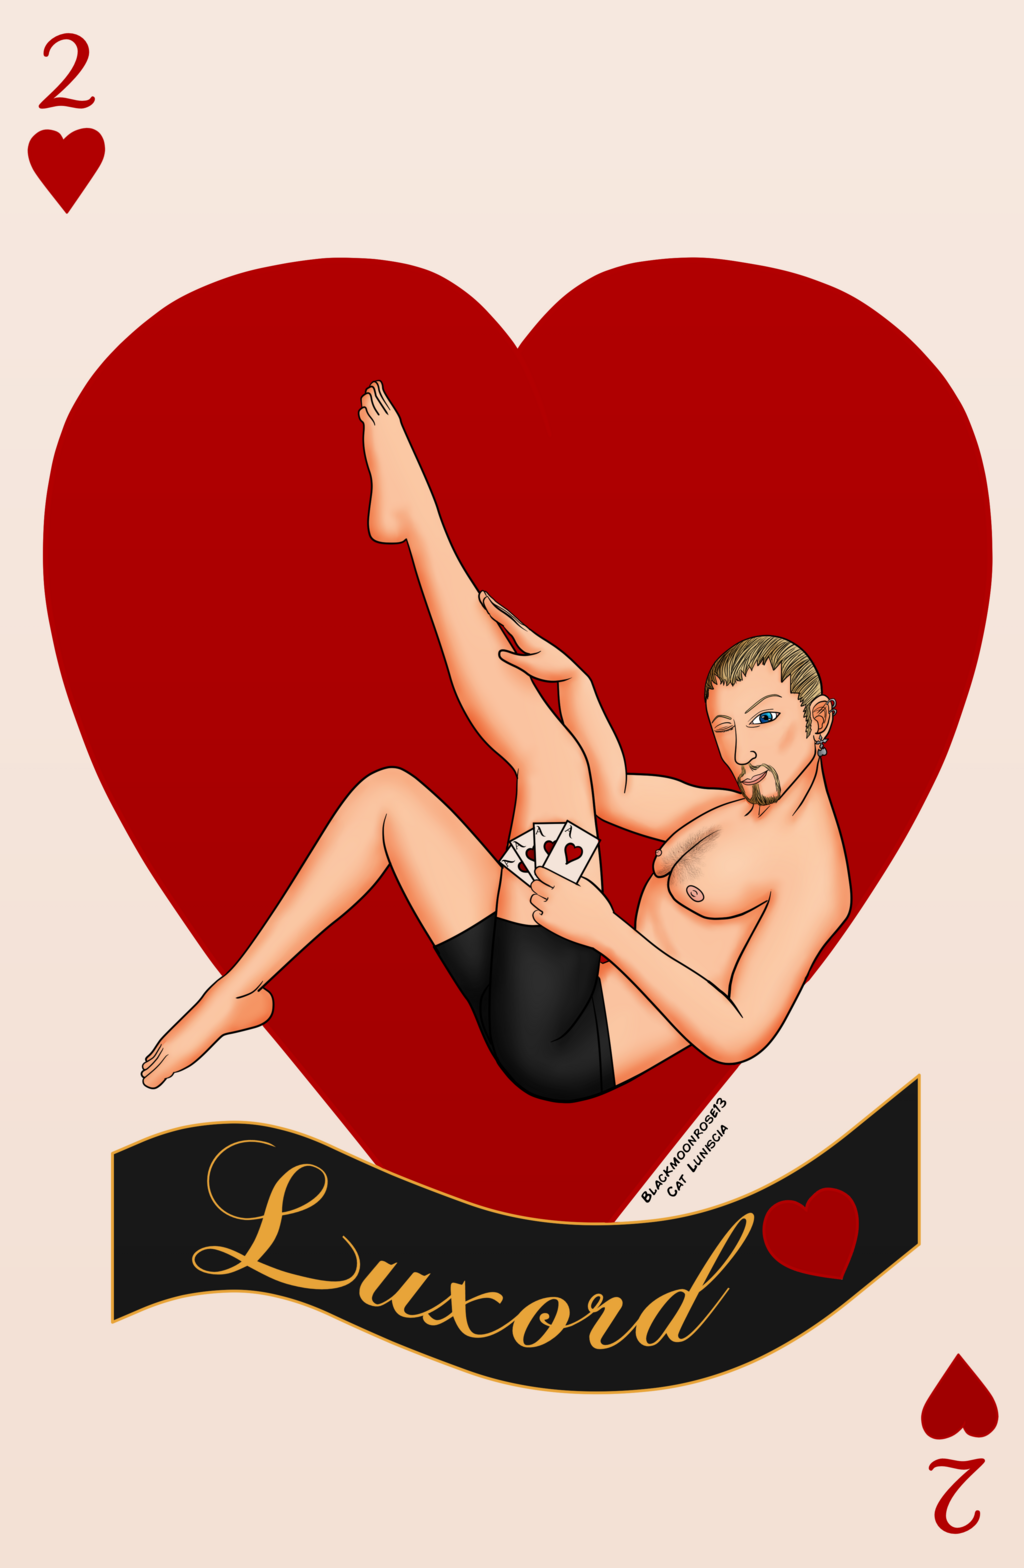 Two of Hearts Luxord